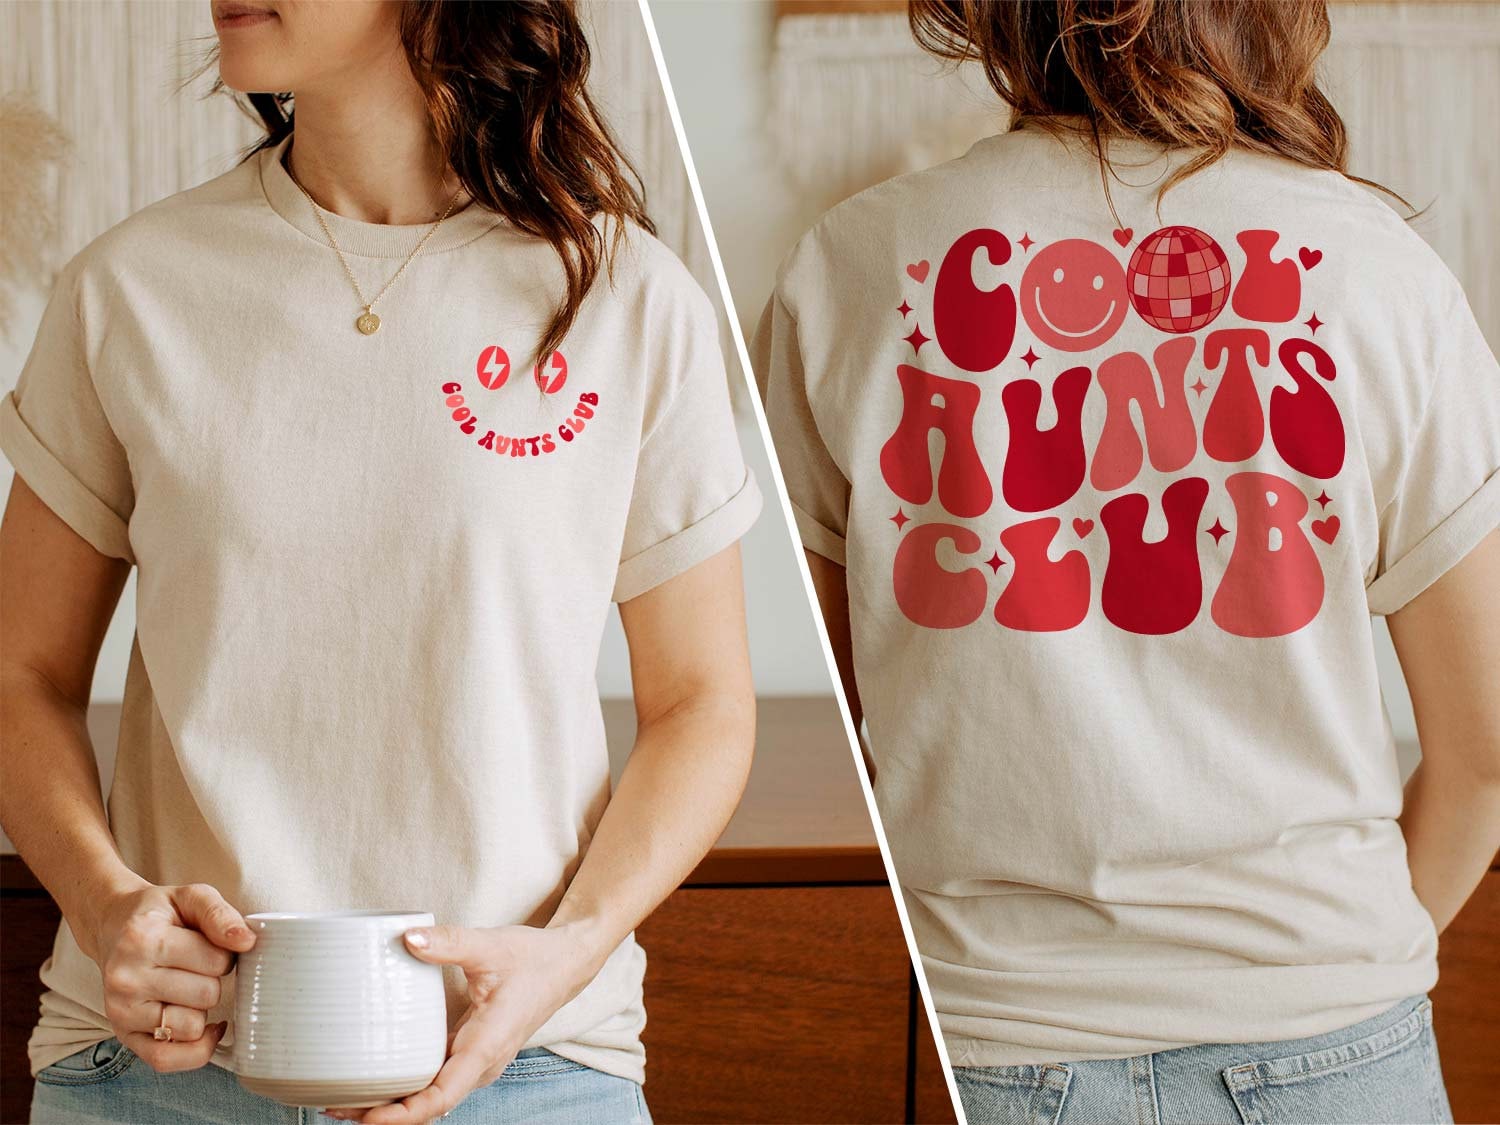 Cool Aunts Club Sweatshirt, Promoted To Aunts, Mothers Day Sweater, Aunts Birthday Gift, Trendy Cool Auntie, Sister Gifts, Funny Mom T-Shirt